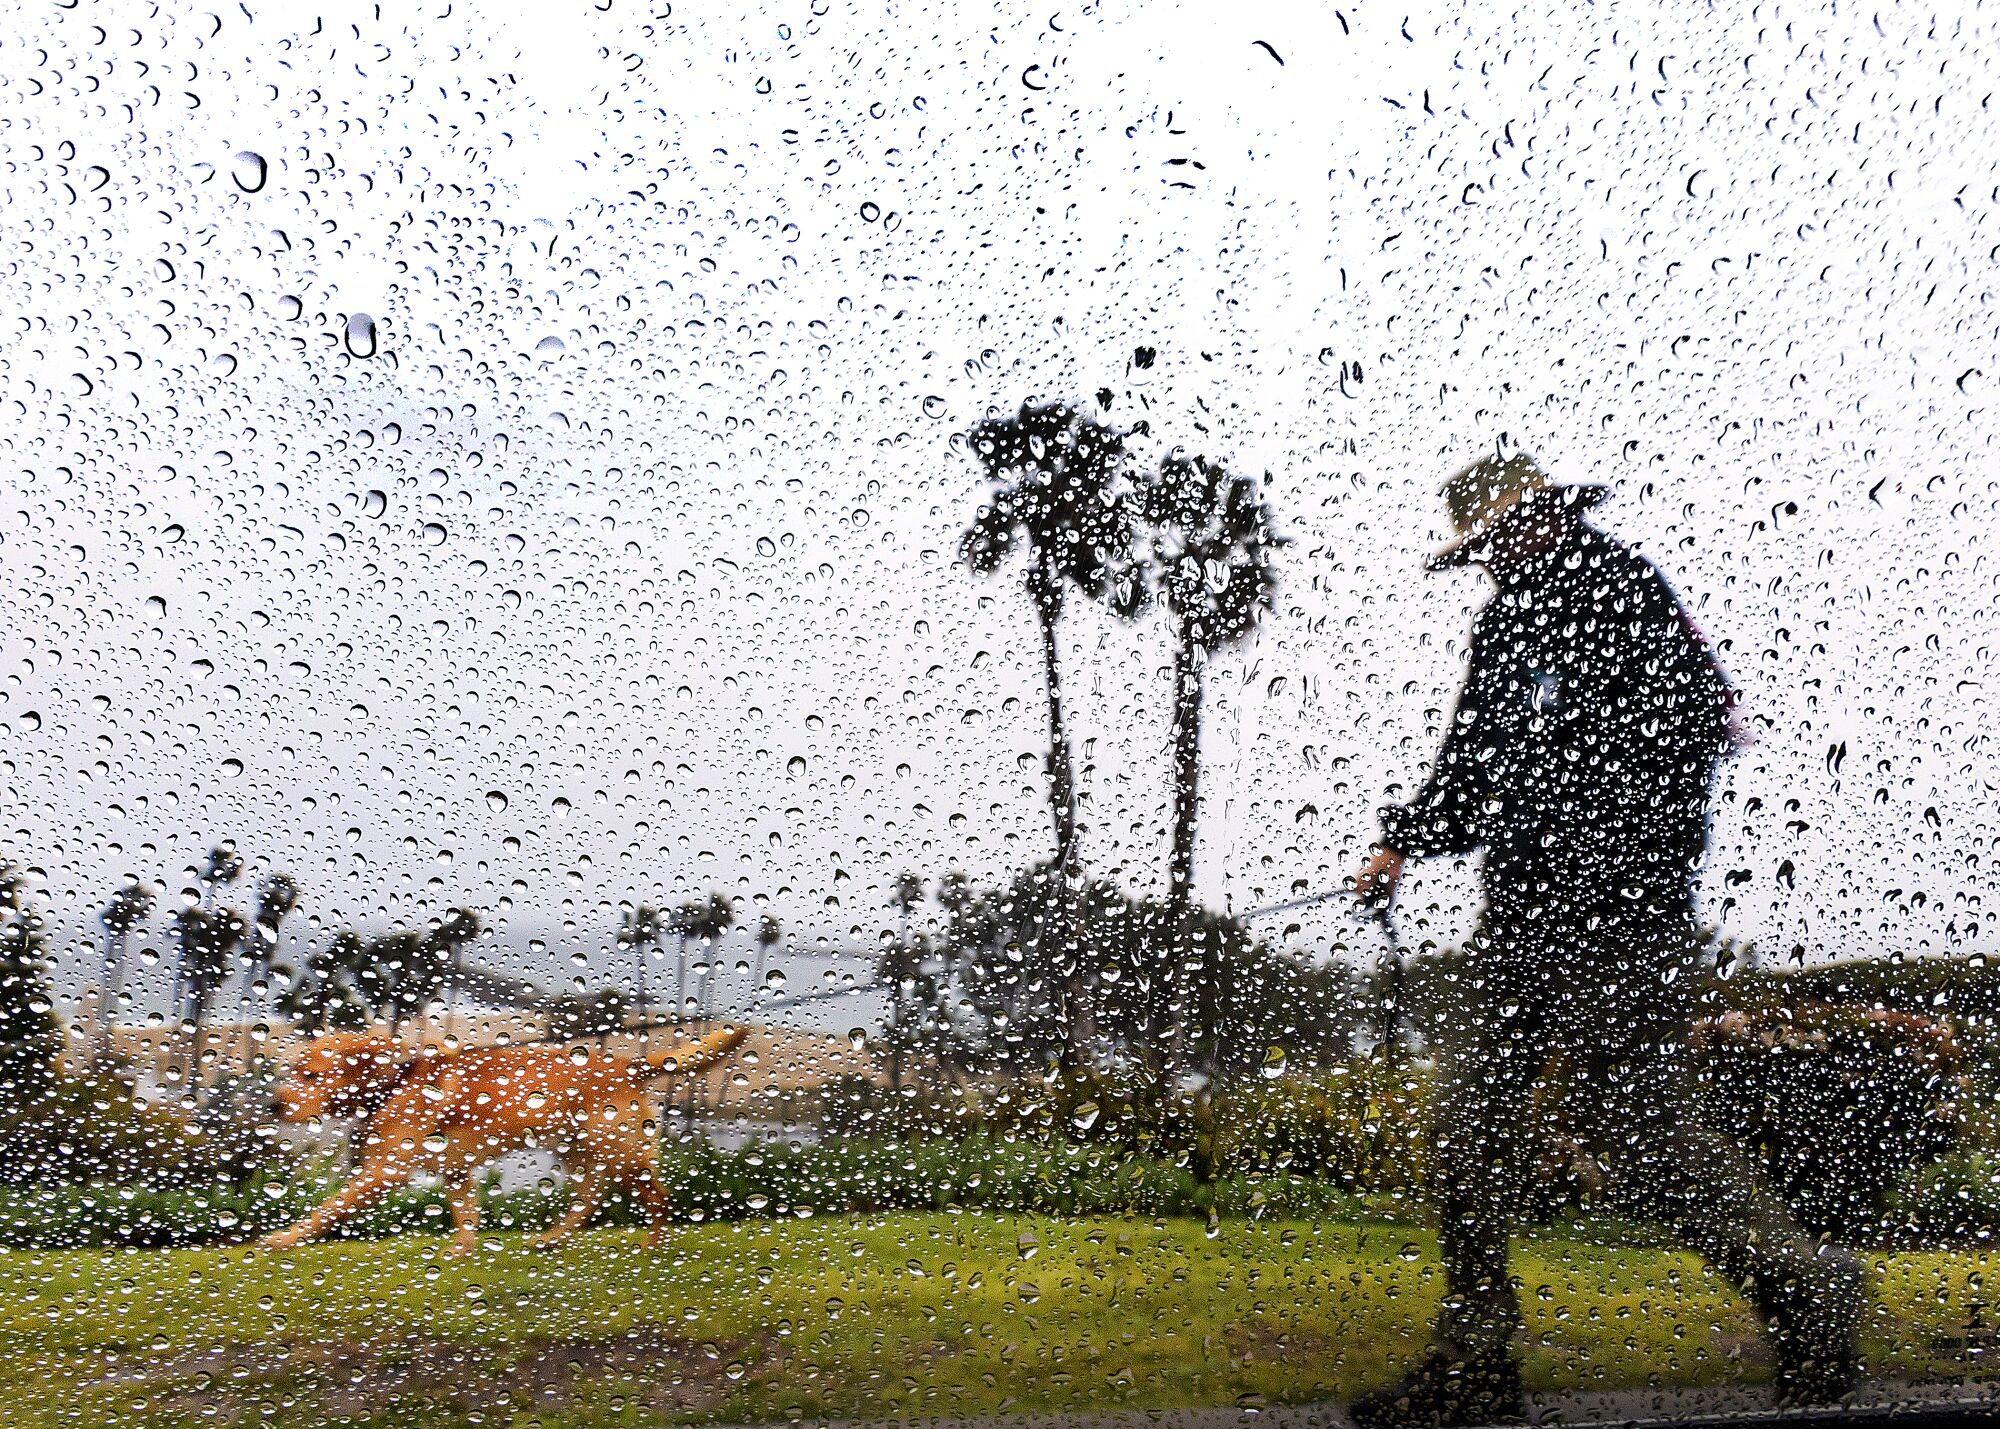 A person walking their dog in the rain is viewed through raindrops gathering on a window